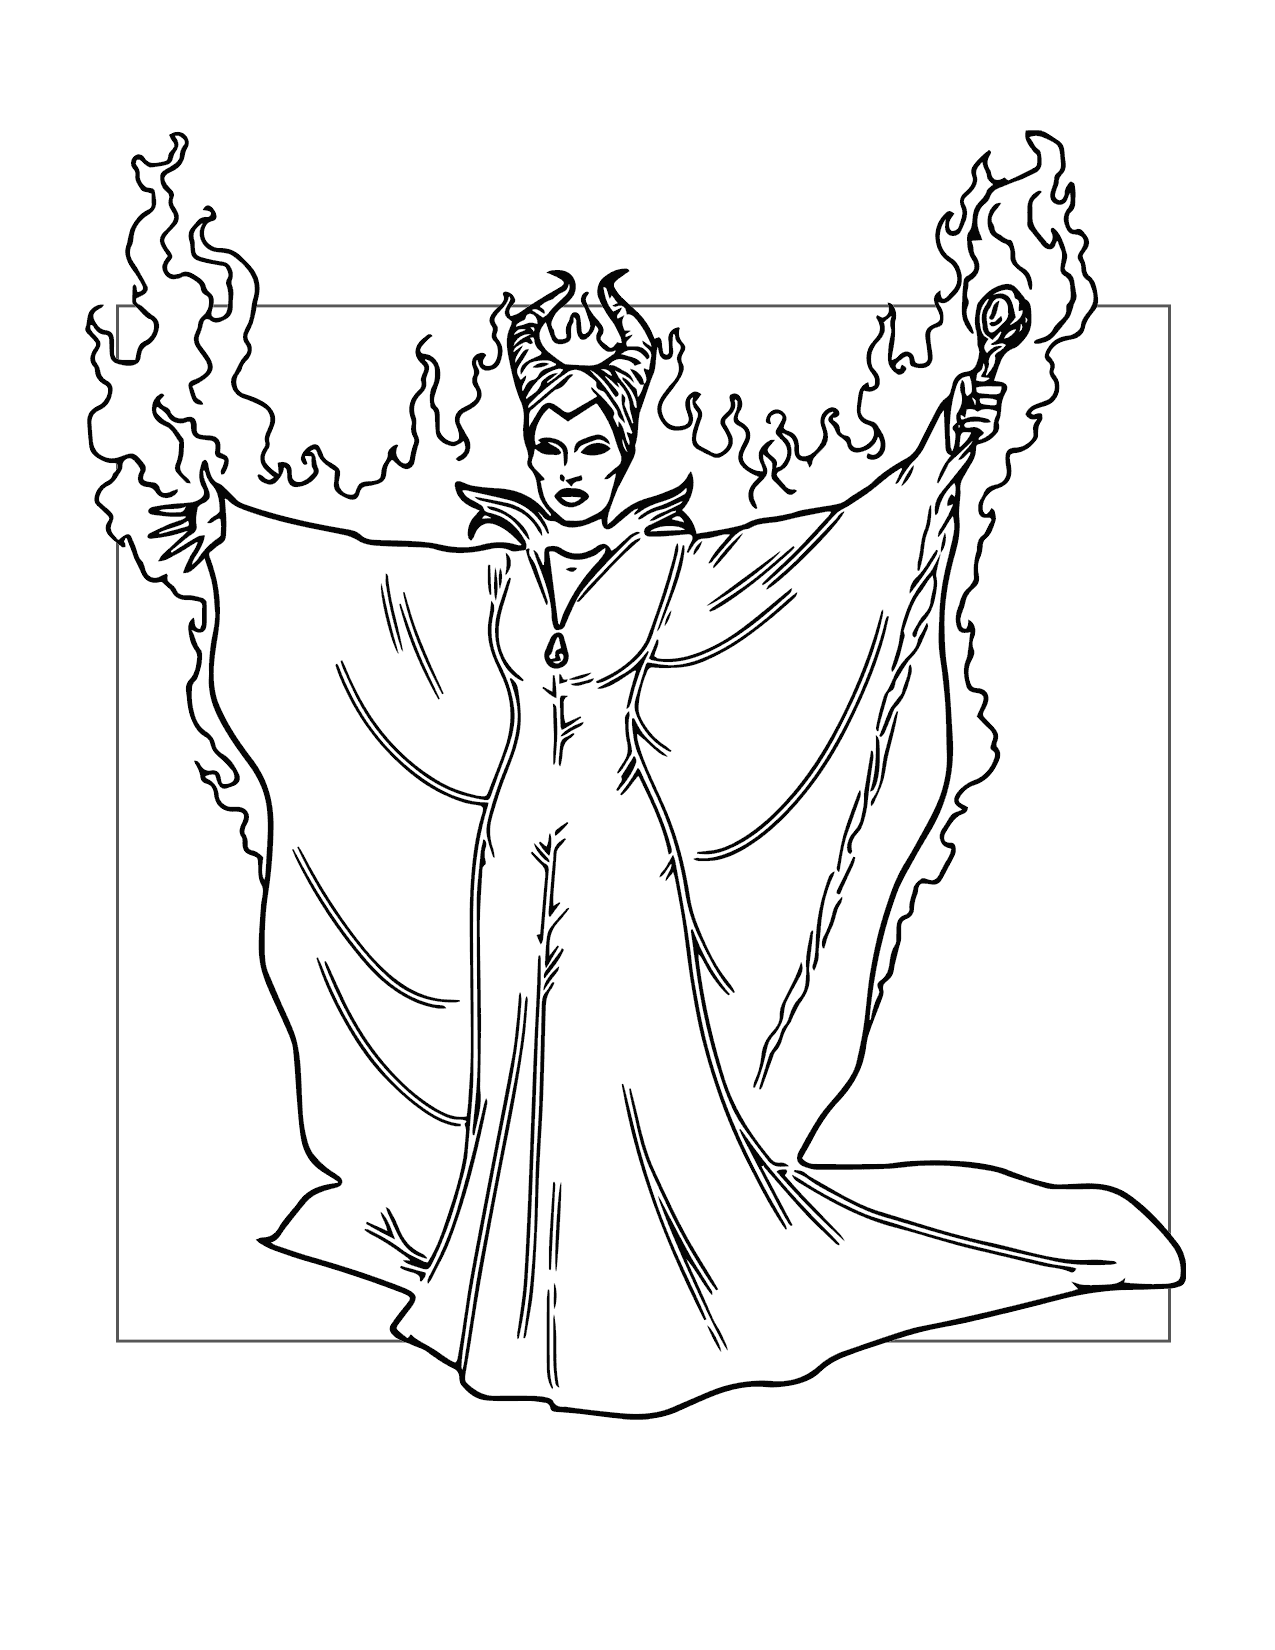 Maleficents Magic Coloring Page